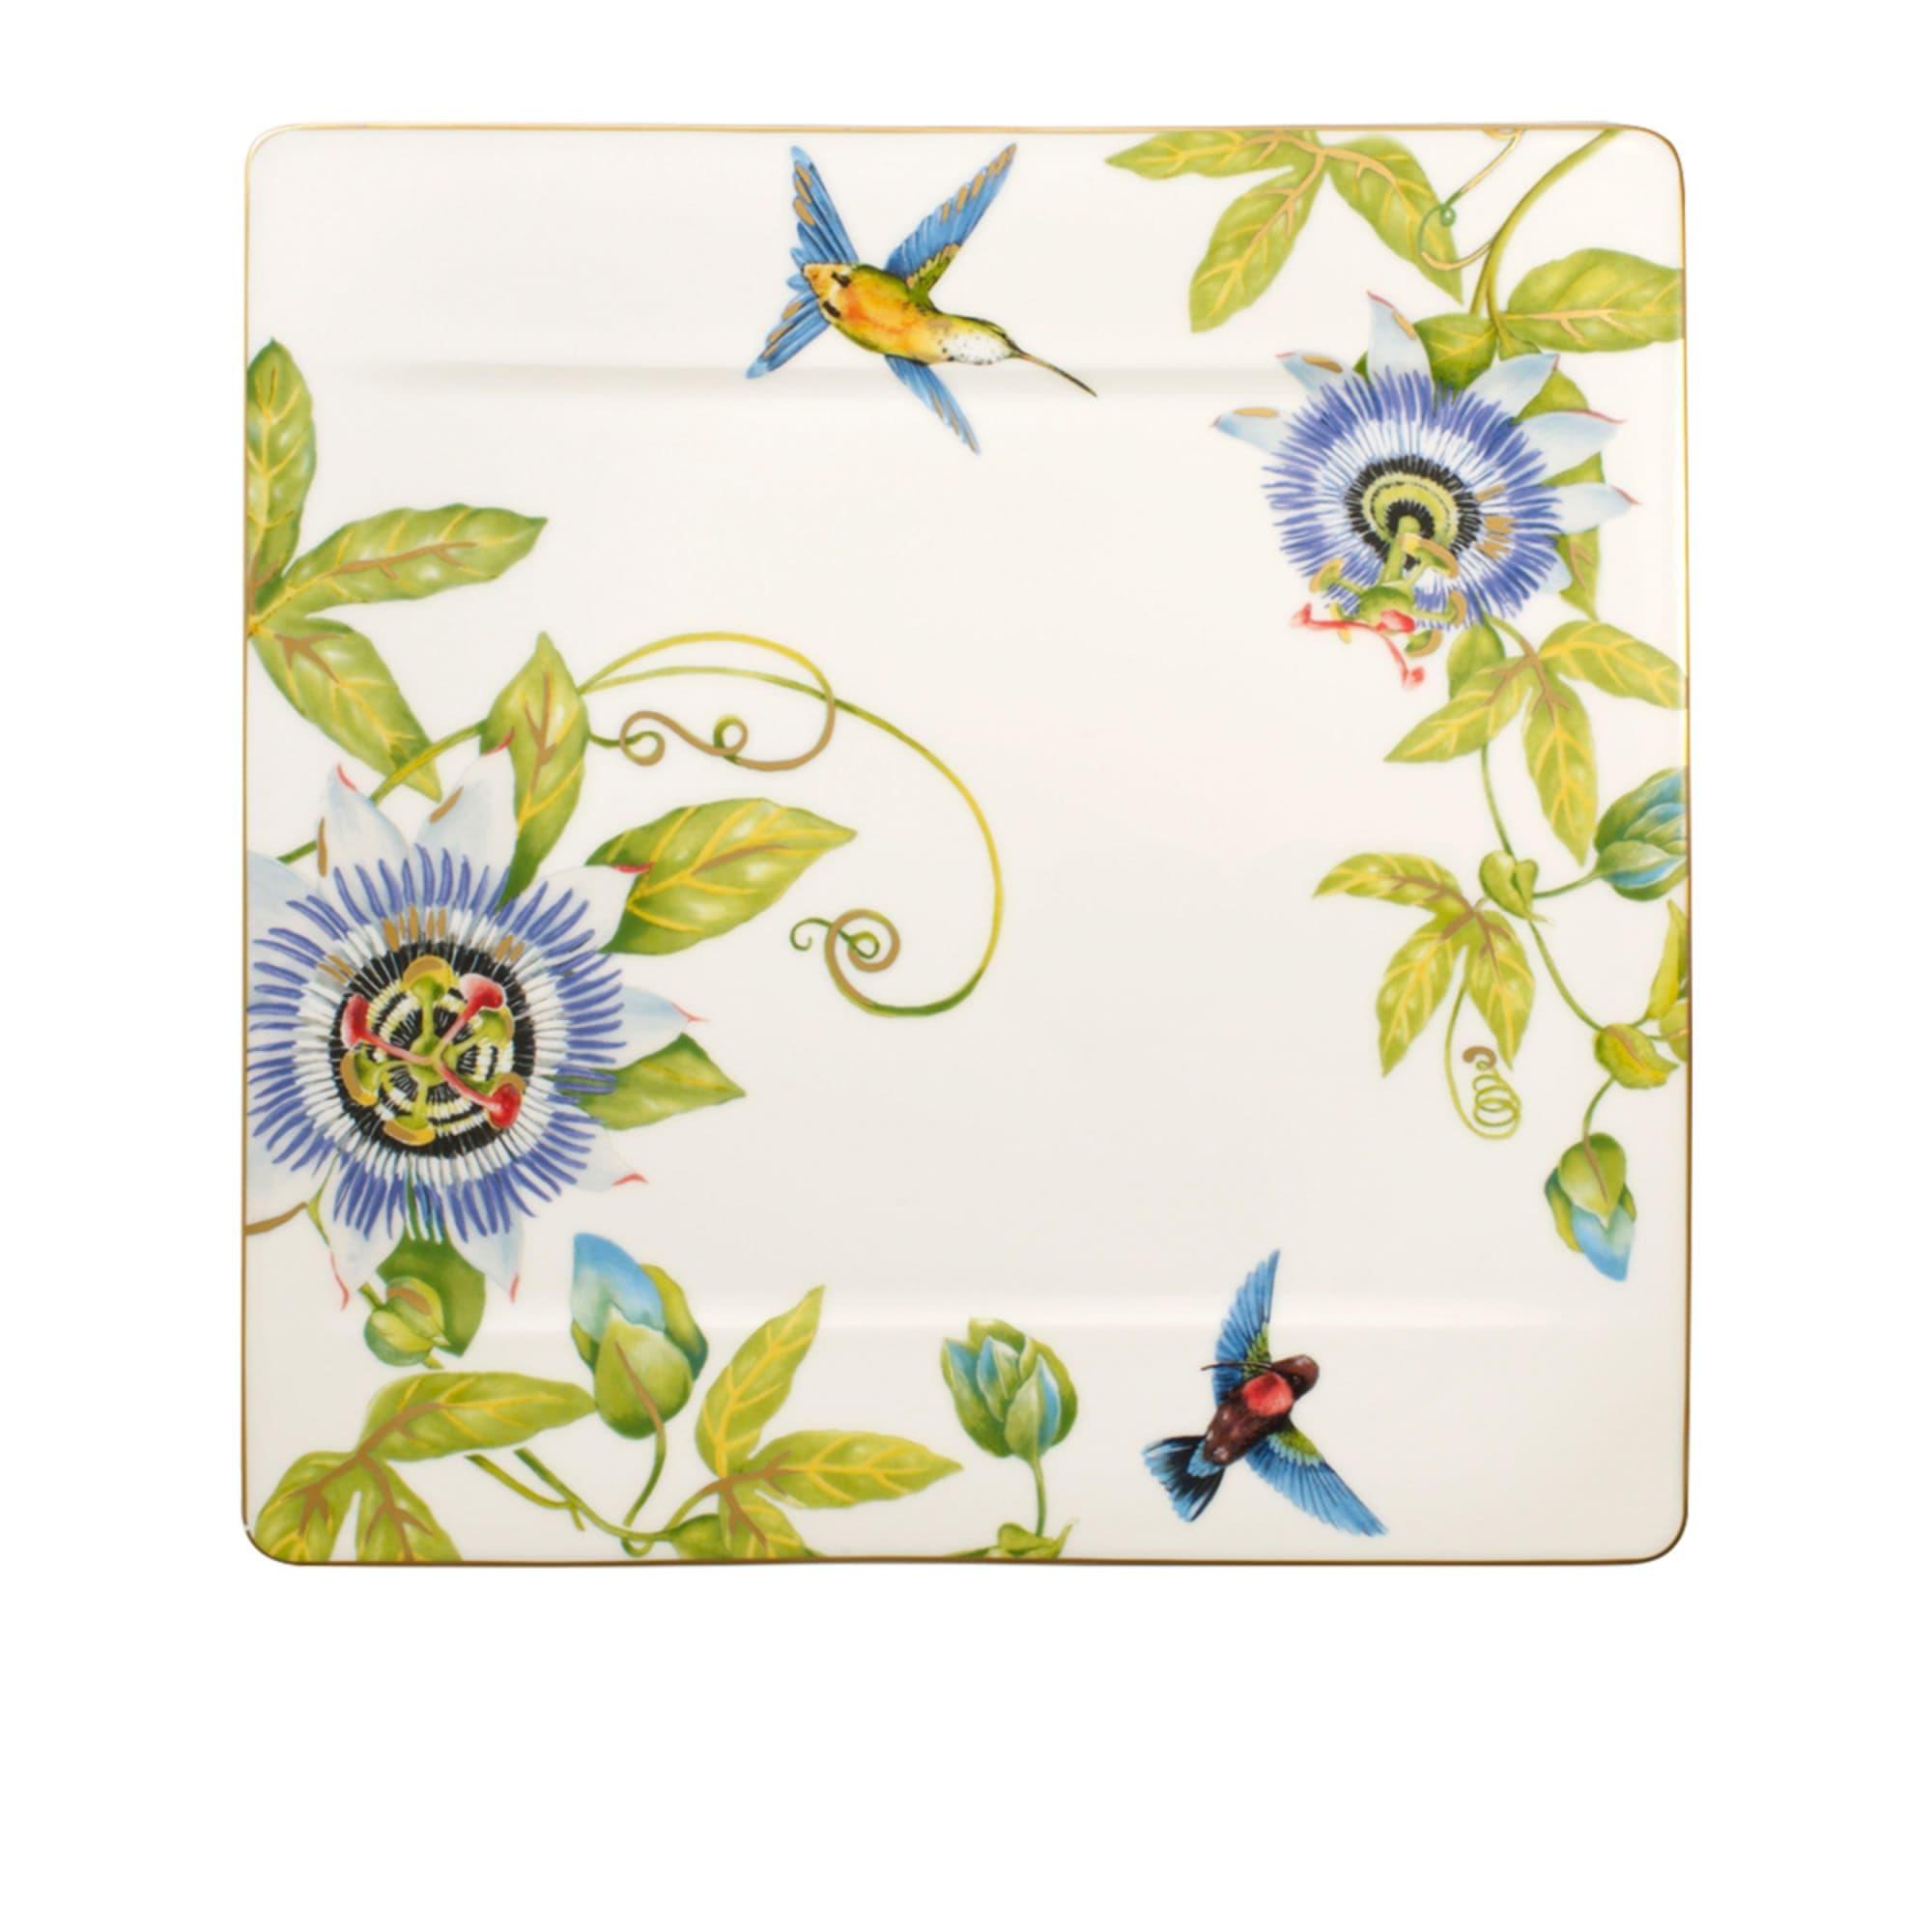 Villeroy & Boch Amazonia Square Gourmet Plate 35cm Image 1